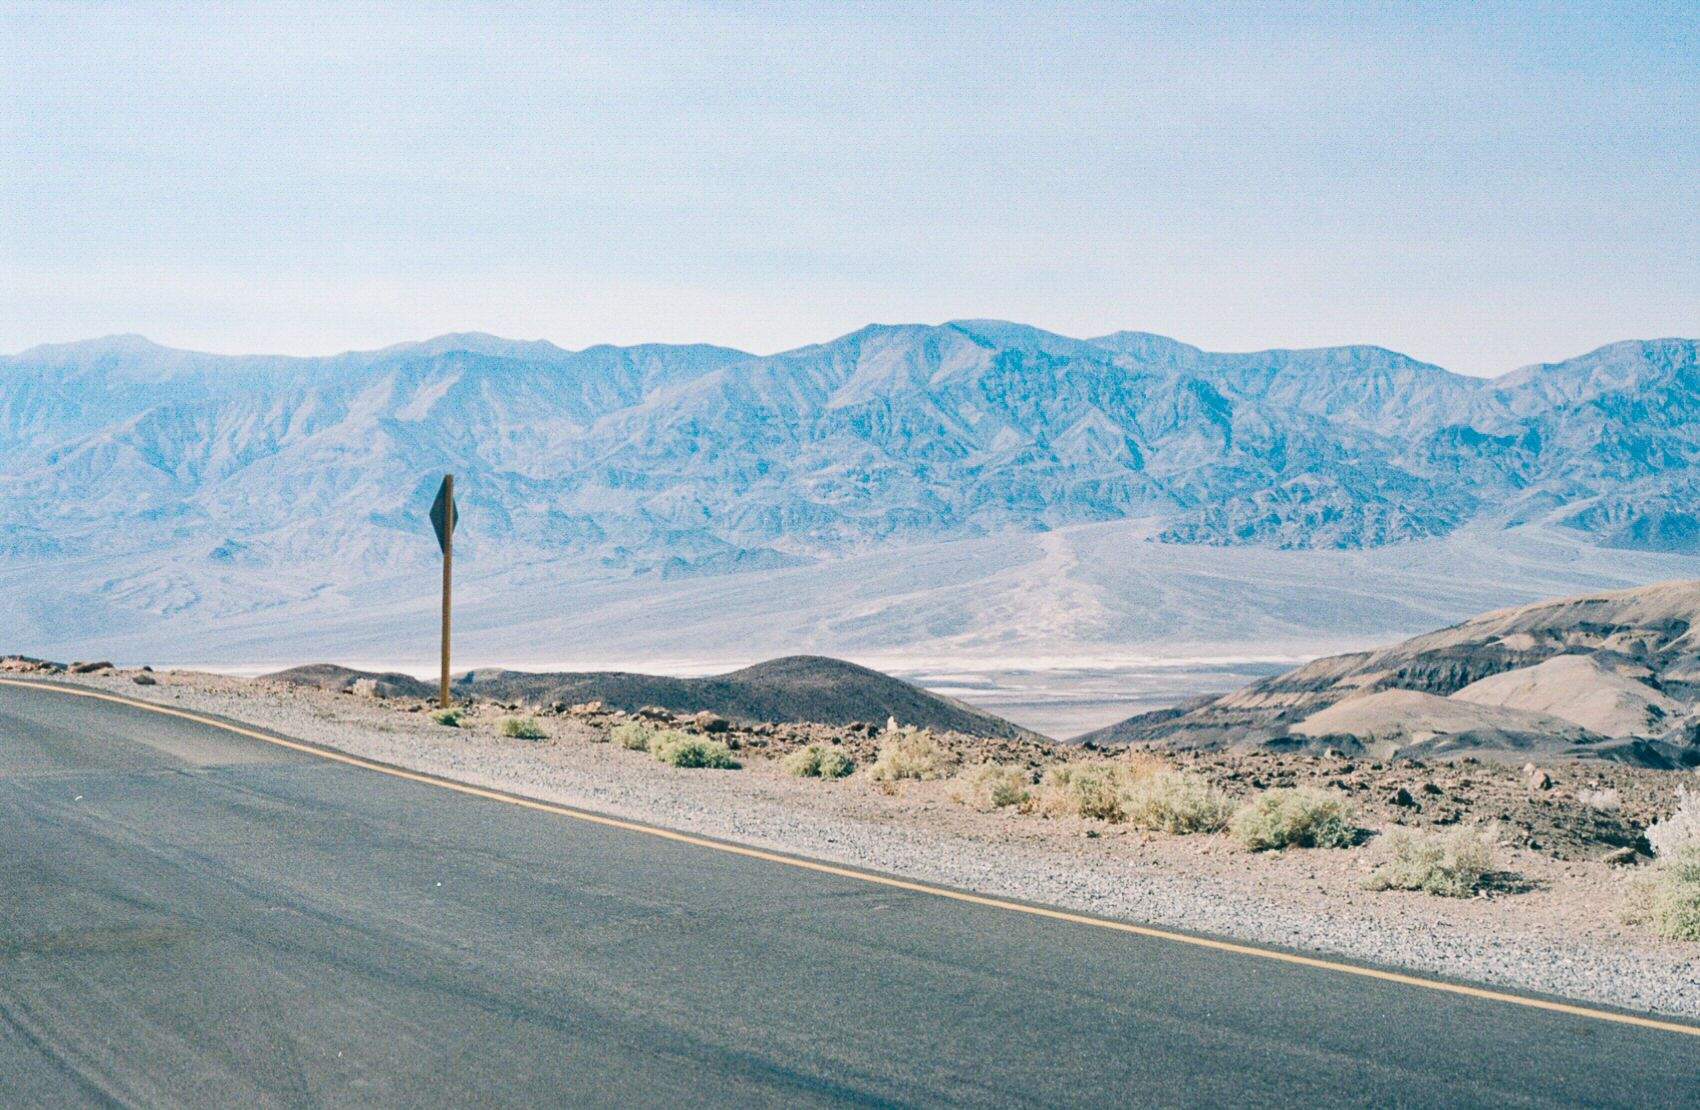 A road and street sign. In the background is Death Valley and its surrounding mountains.